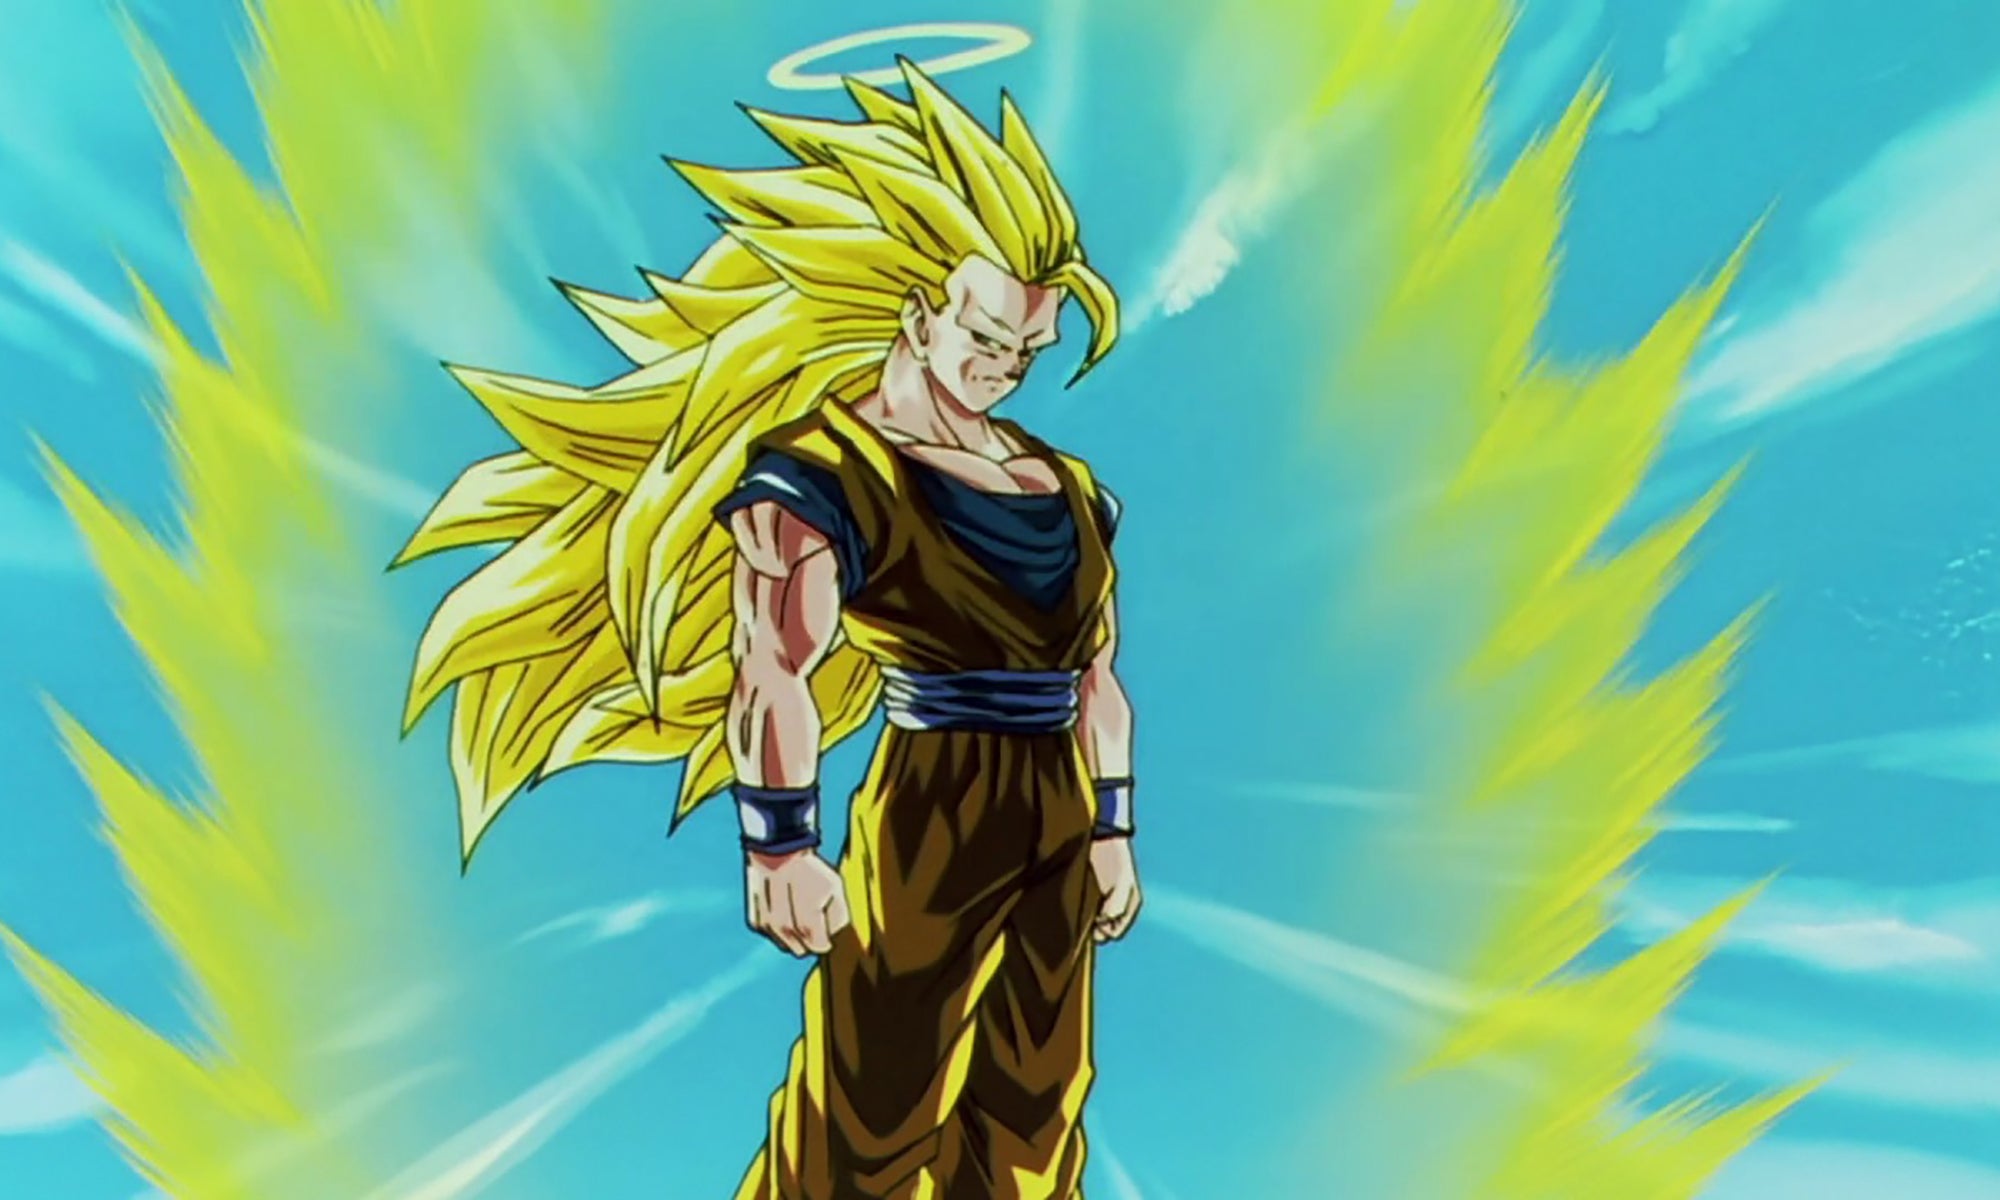 dragon-ball-z-broly--second-coming-(movie-10)